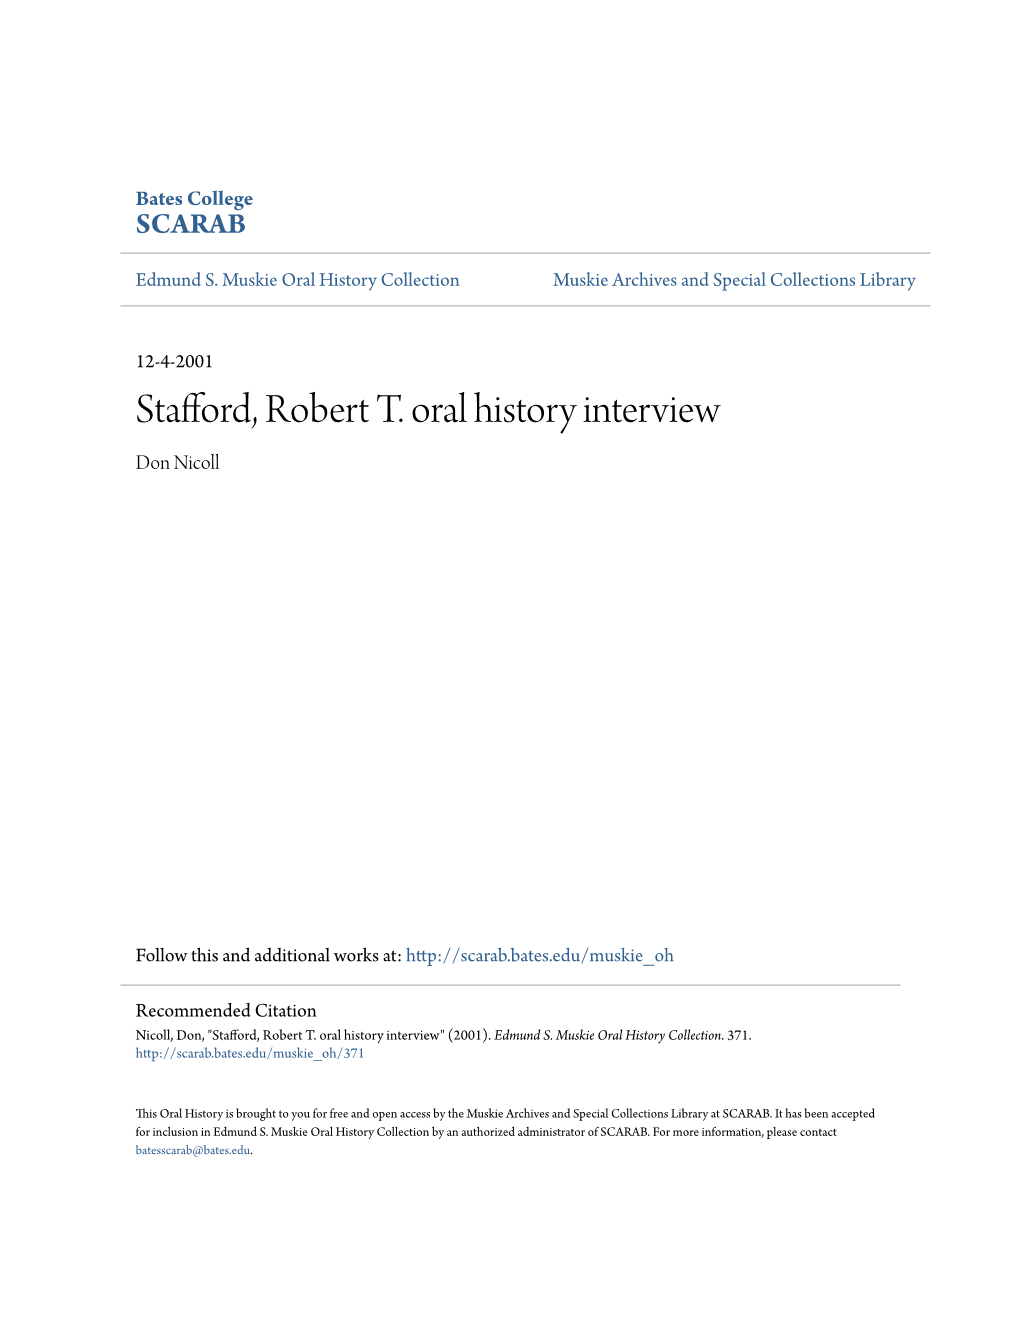 Stafford, Robert T. Oral History Interview Don Nicoll